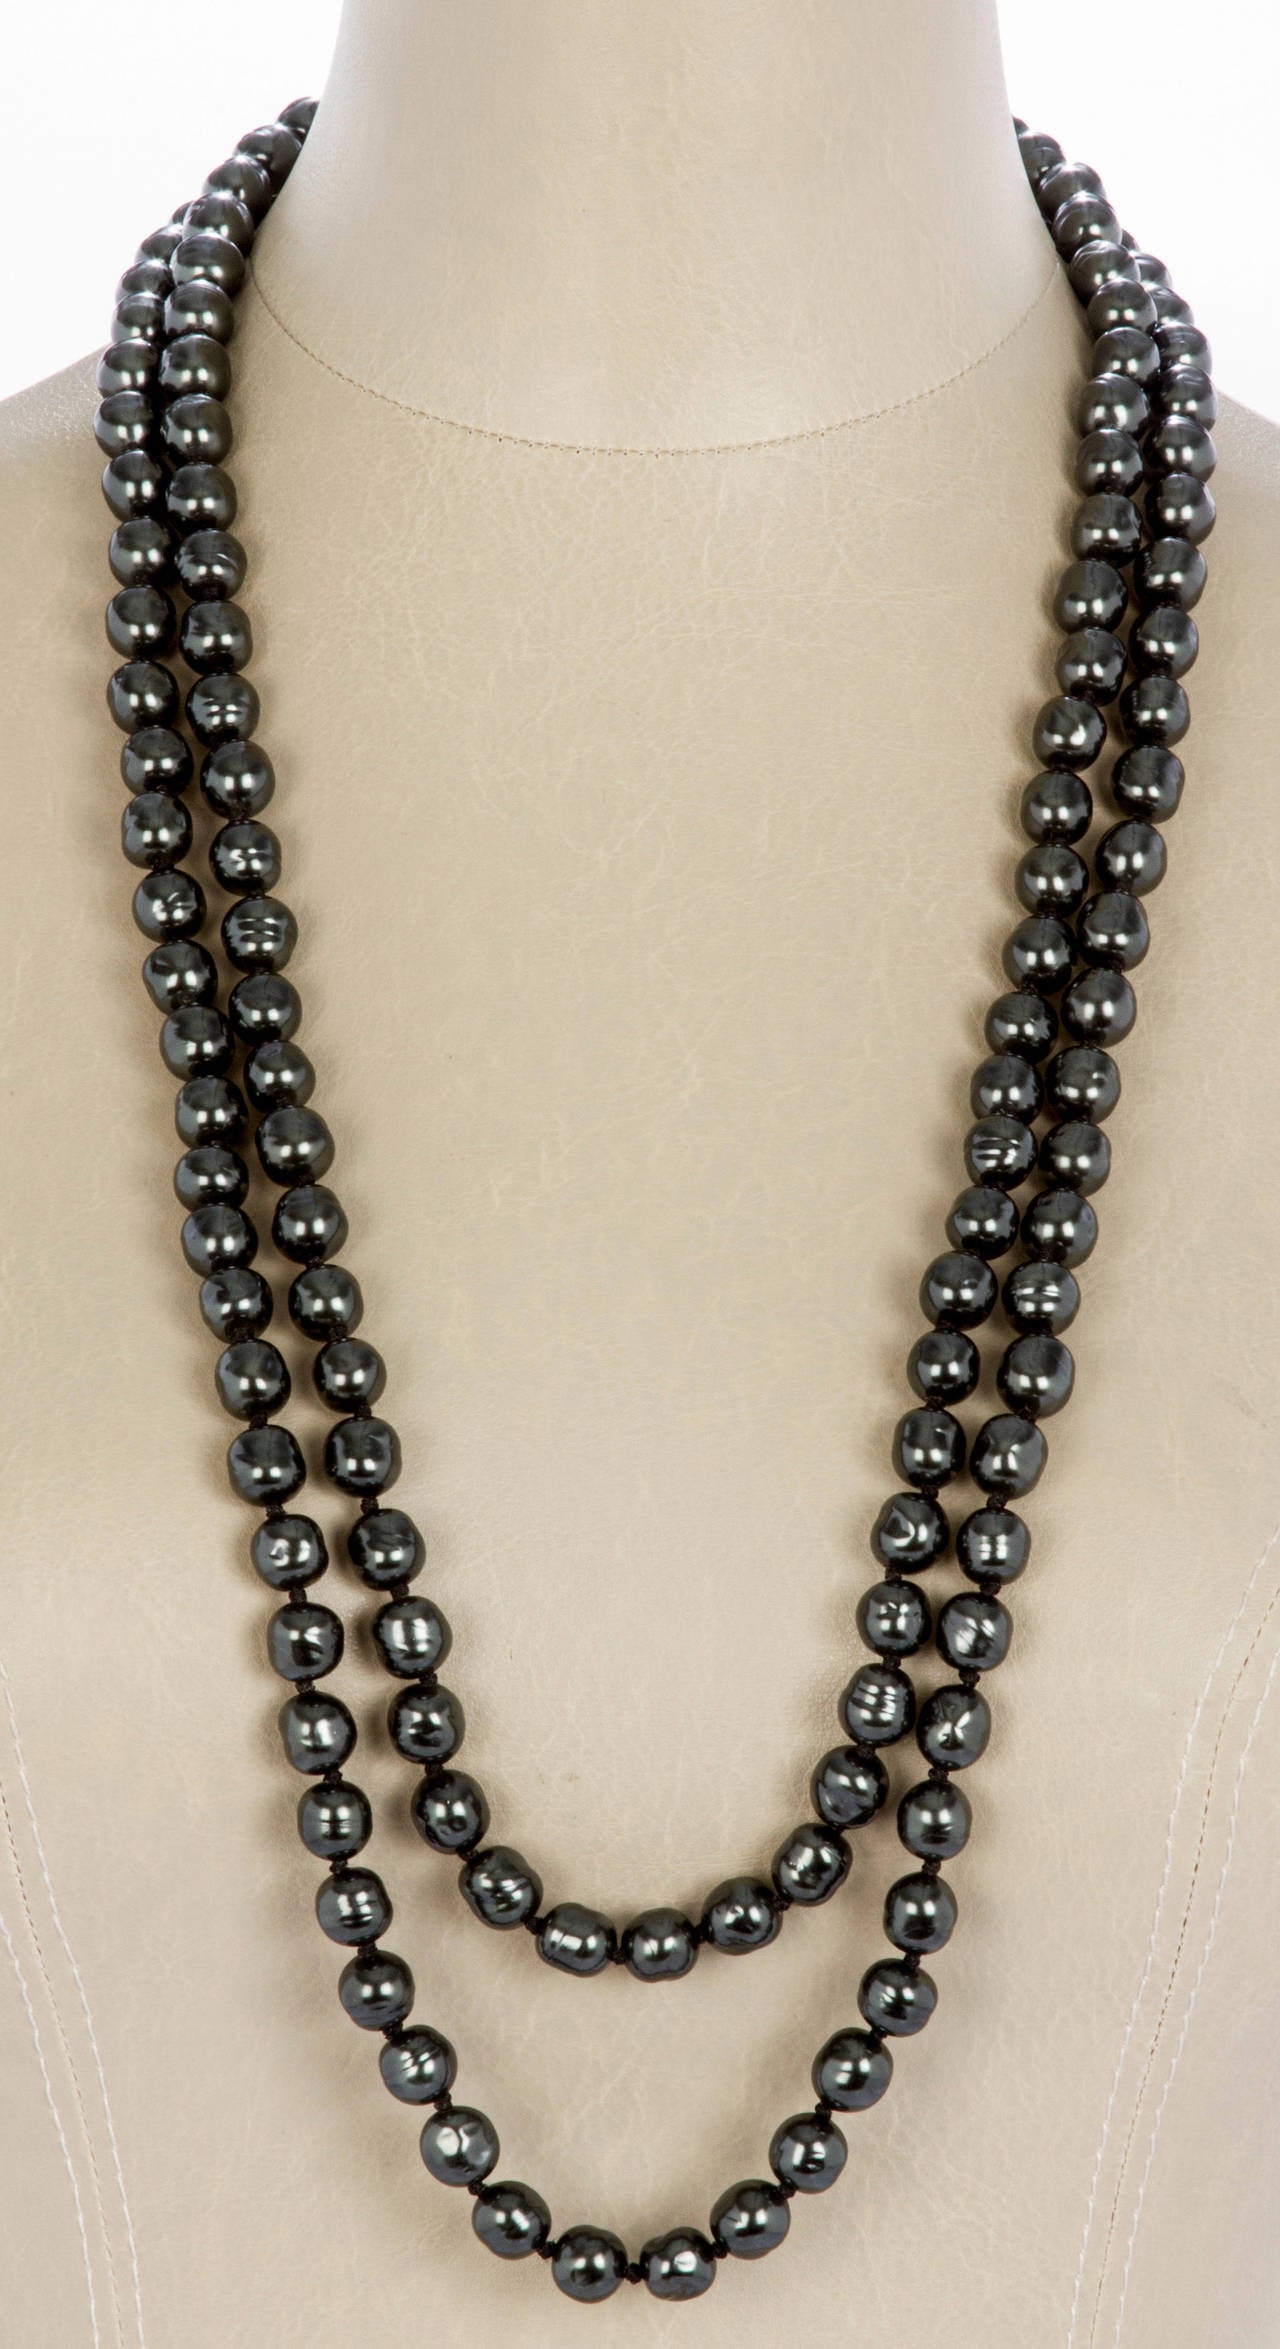 This is great by itself or layered with other pieces. The length makes this a versatile necklace.